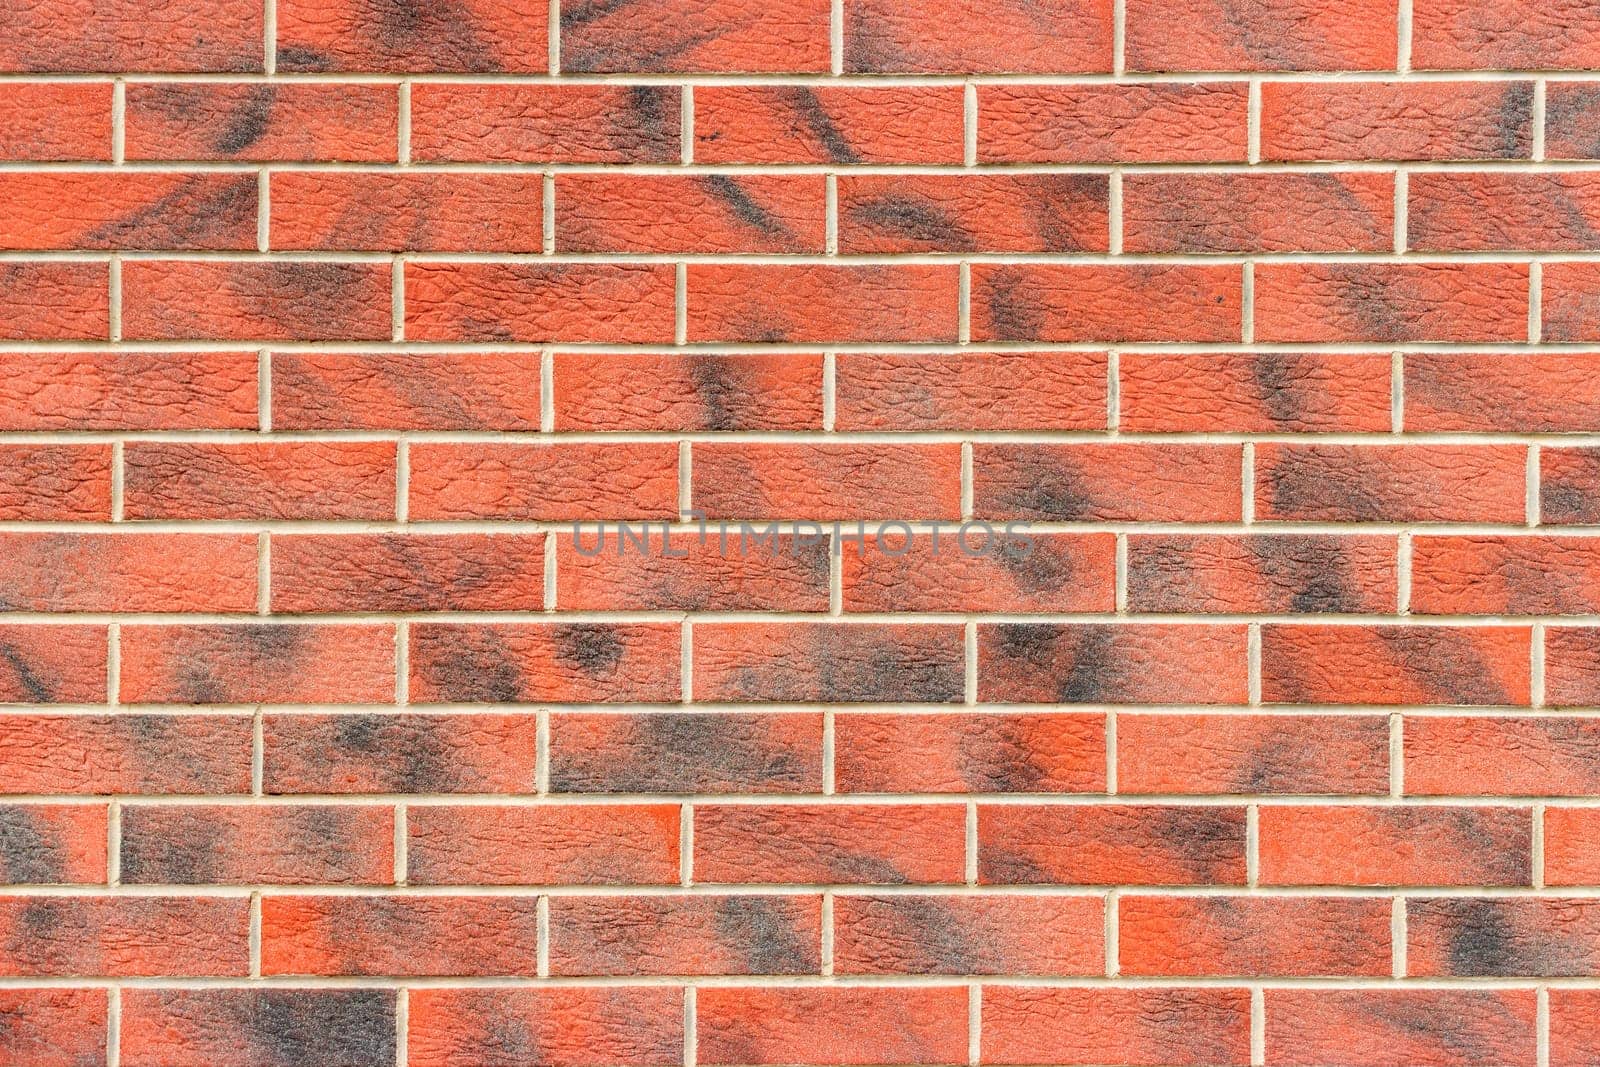 brick wall texture background material of industry construction, image used retro filter by Snegok1967